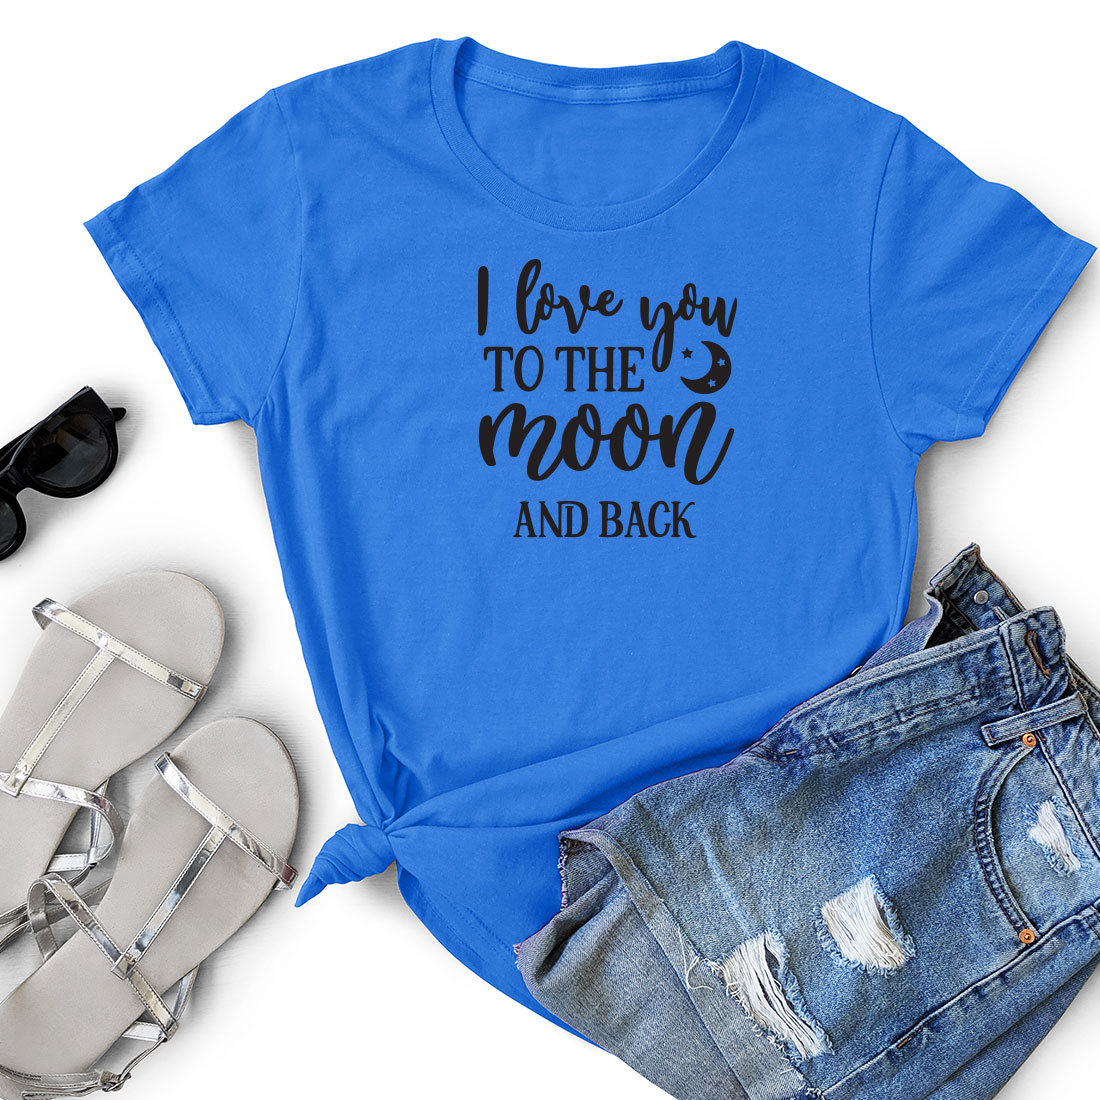 T - shirt that says i love you to the moon and back.